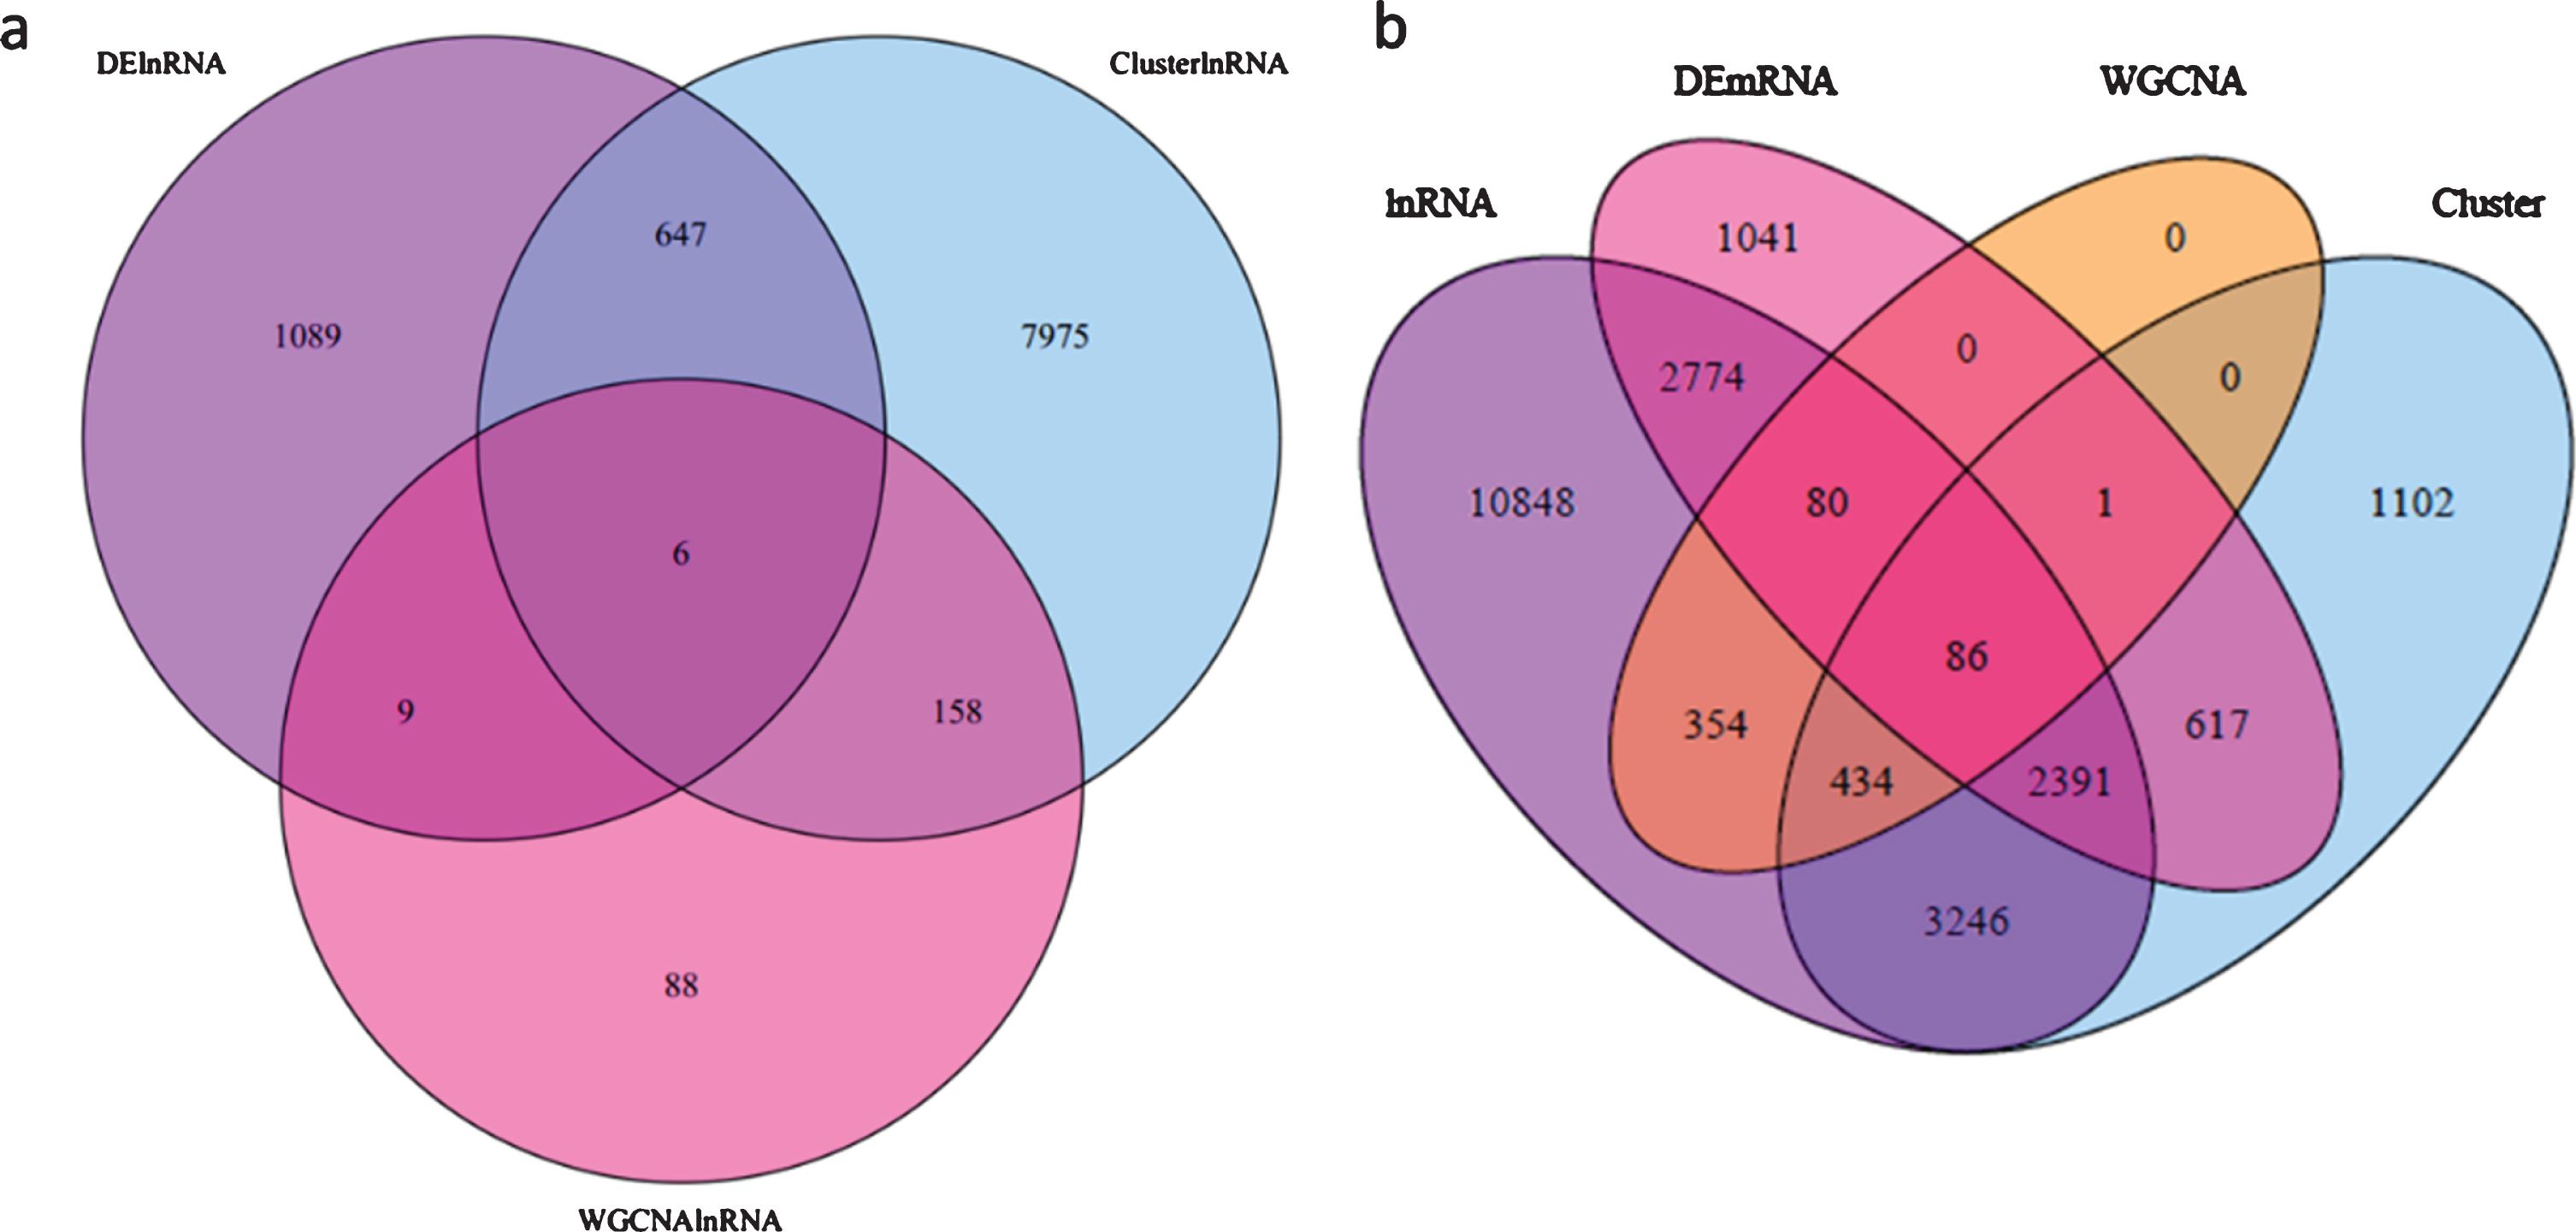 Venn diagram showing the lncRNAs and mRNAs in this study among different analyses. a, lncRNAs among differential expression analysis, TCseq cluster analysis and WGCNA analysis; b, mRNAs between DE-mRNAs and targets of lncRNAs from DE-lncRNA, TCseq cluster analysis and WGCNA analysis.